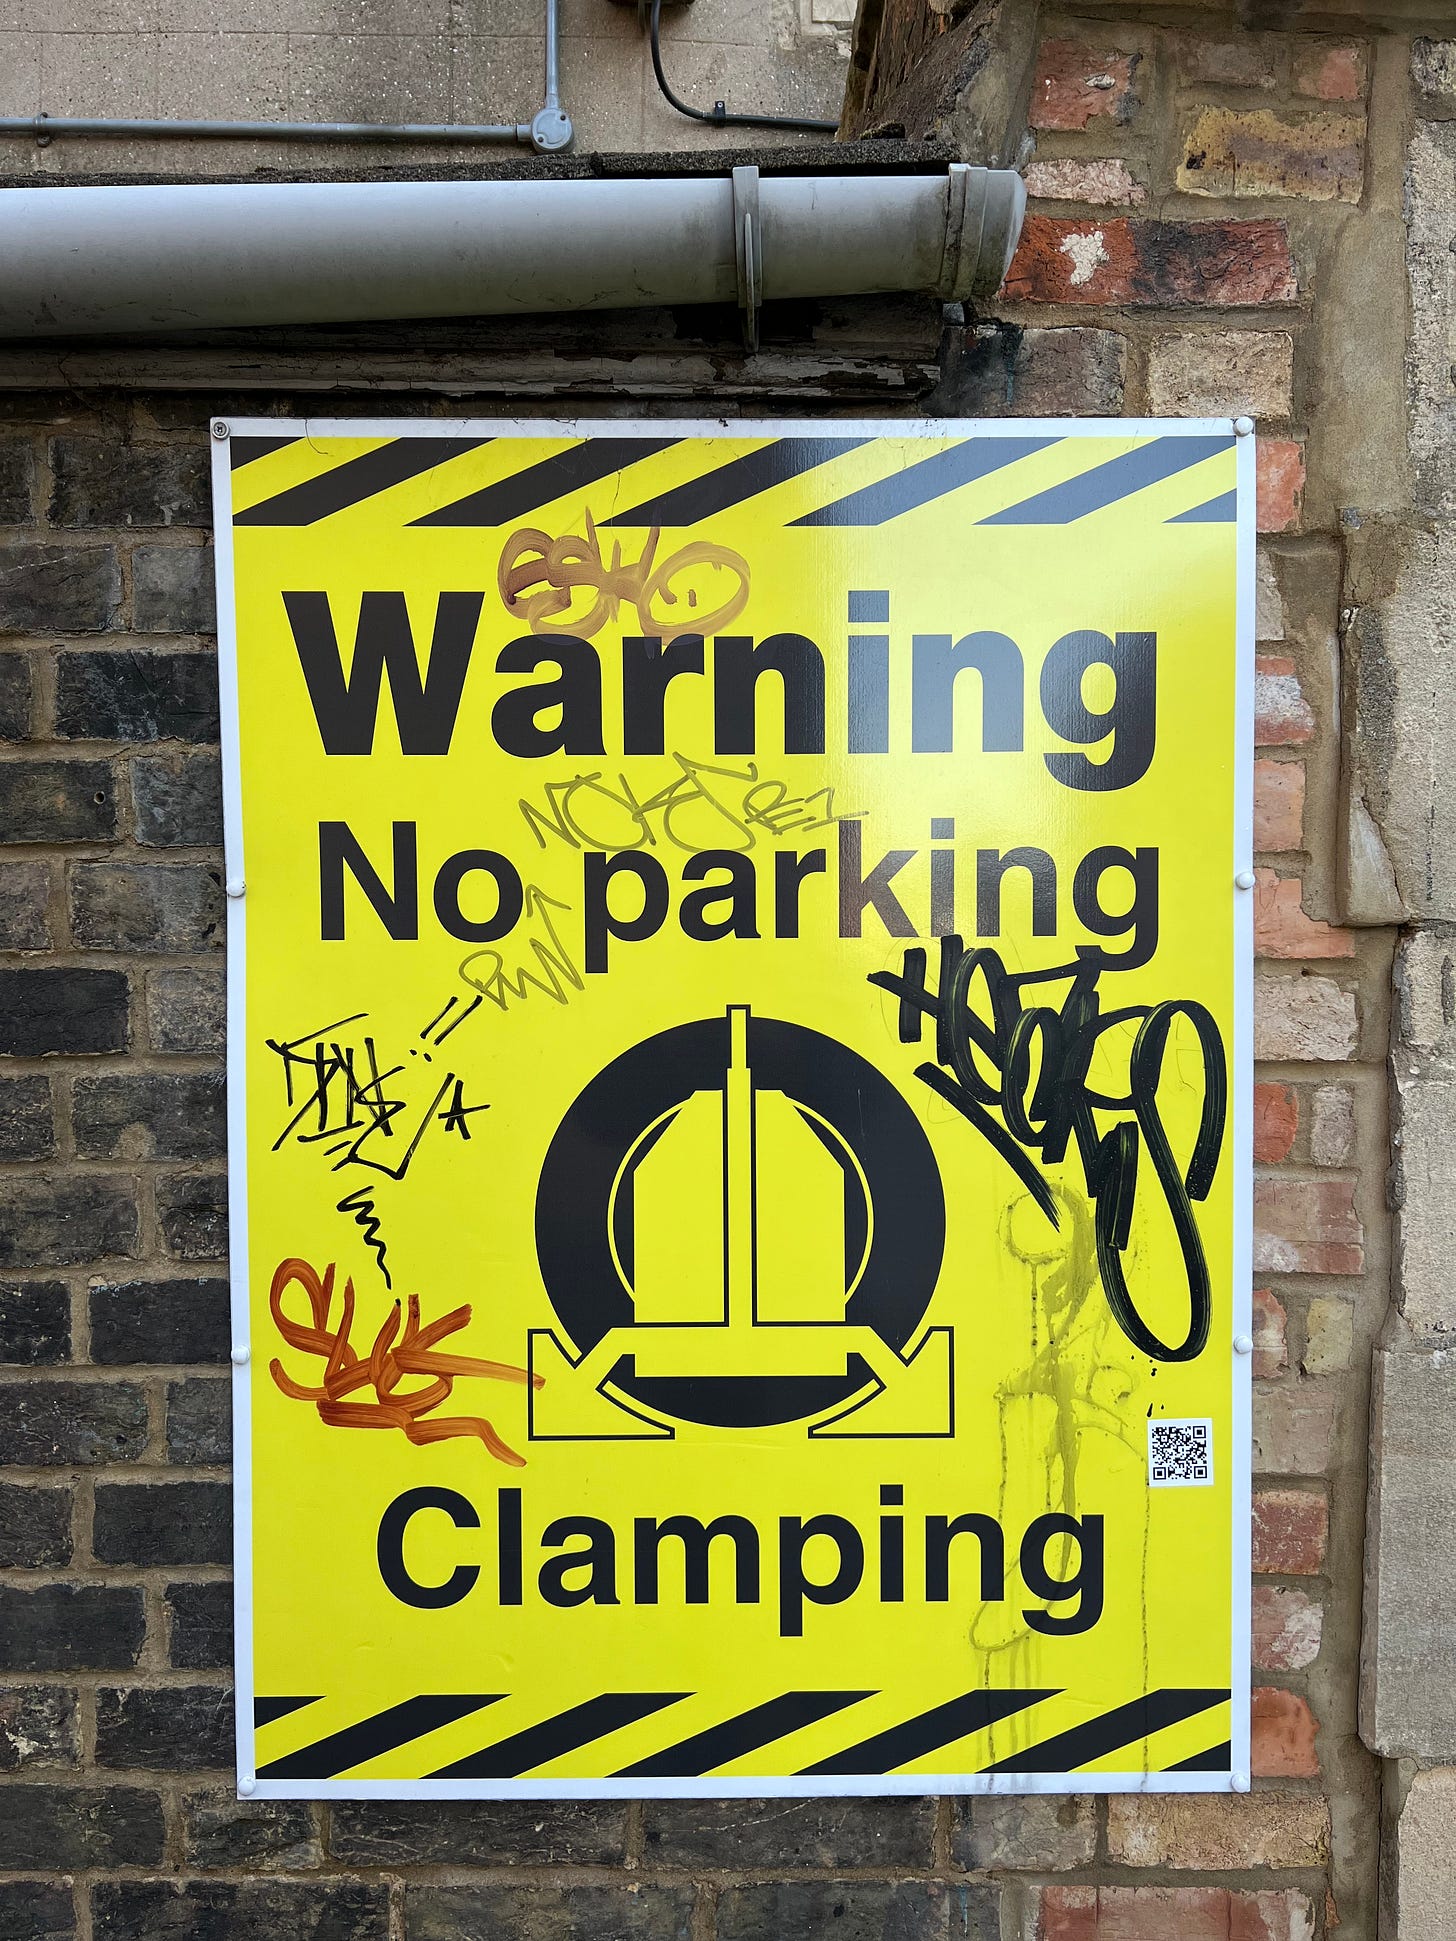 A no parking wheel clamping sign with some graffiti on it.